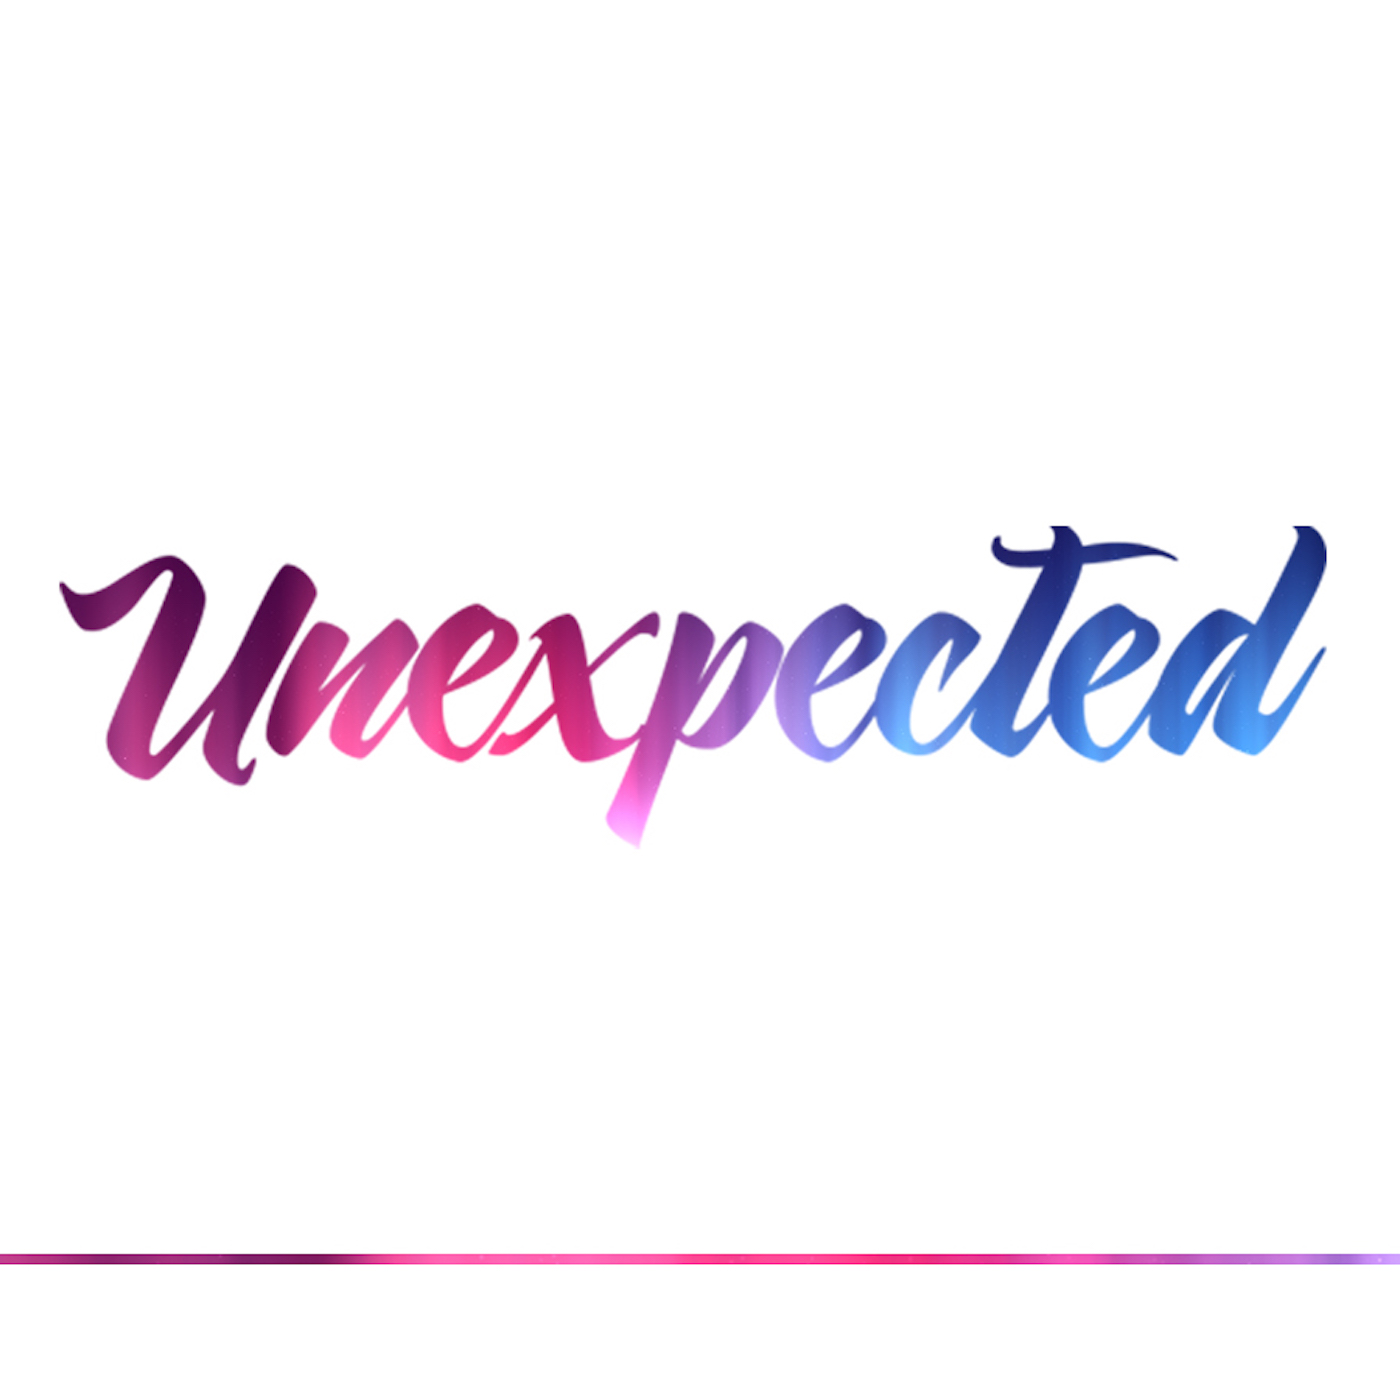 Unexpected - Week 7